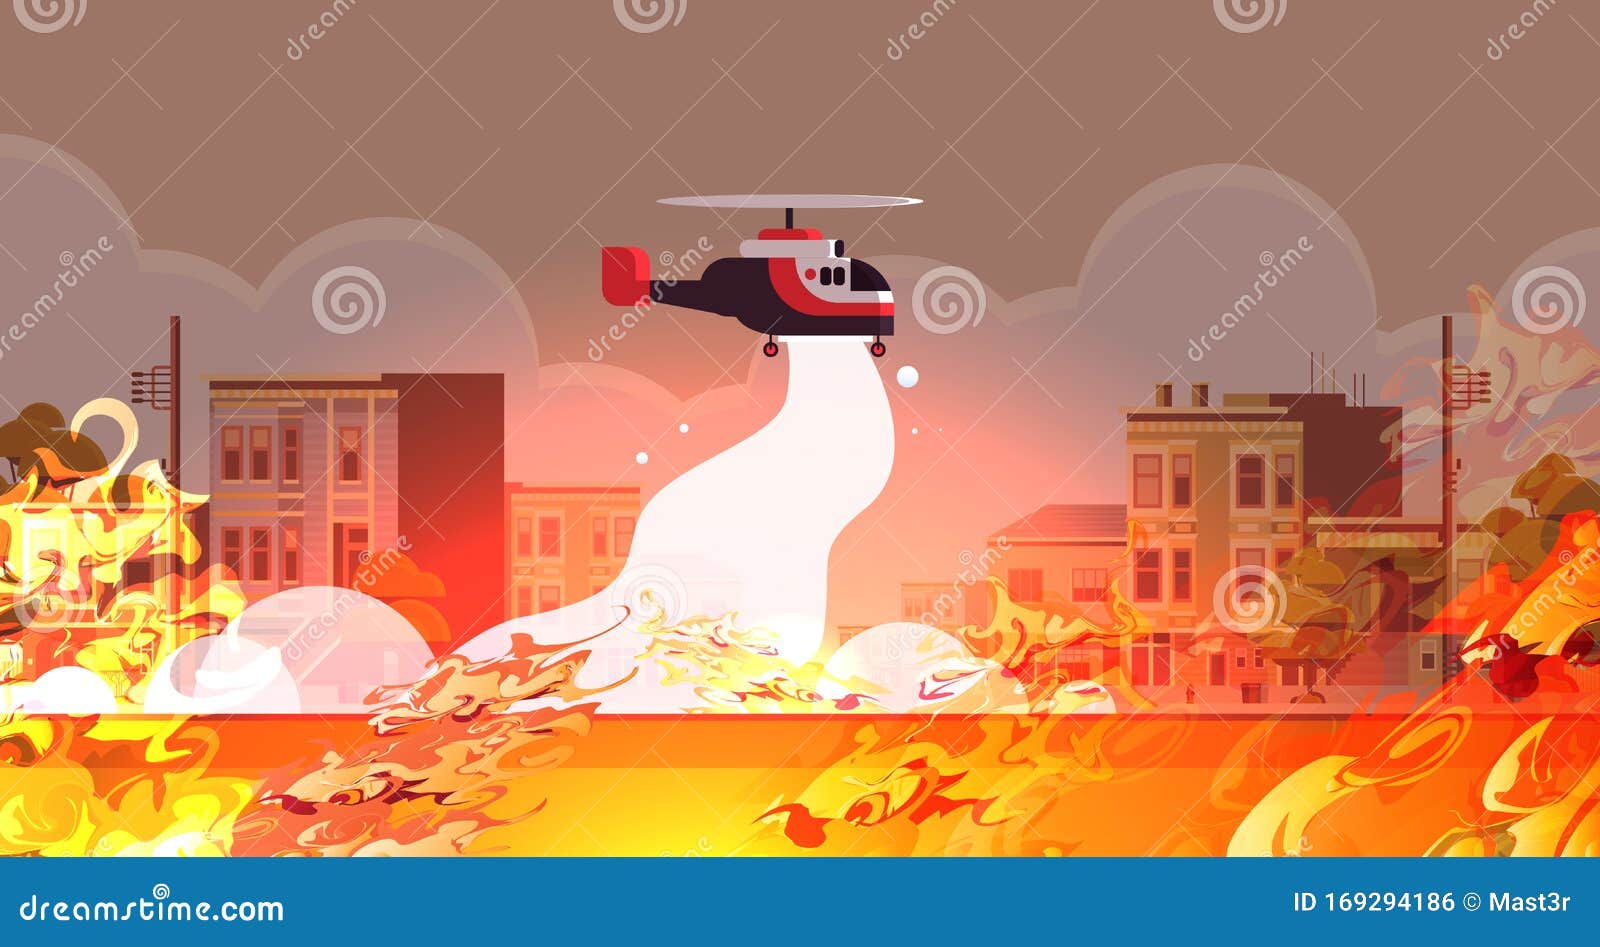 helicopter extinguishes dangerous fire aerial firefighting natural disaster concept intense orange flames city street